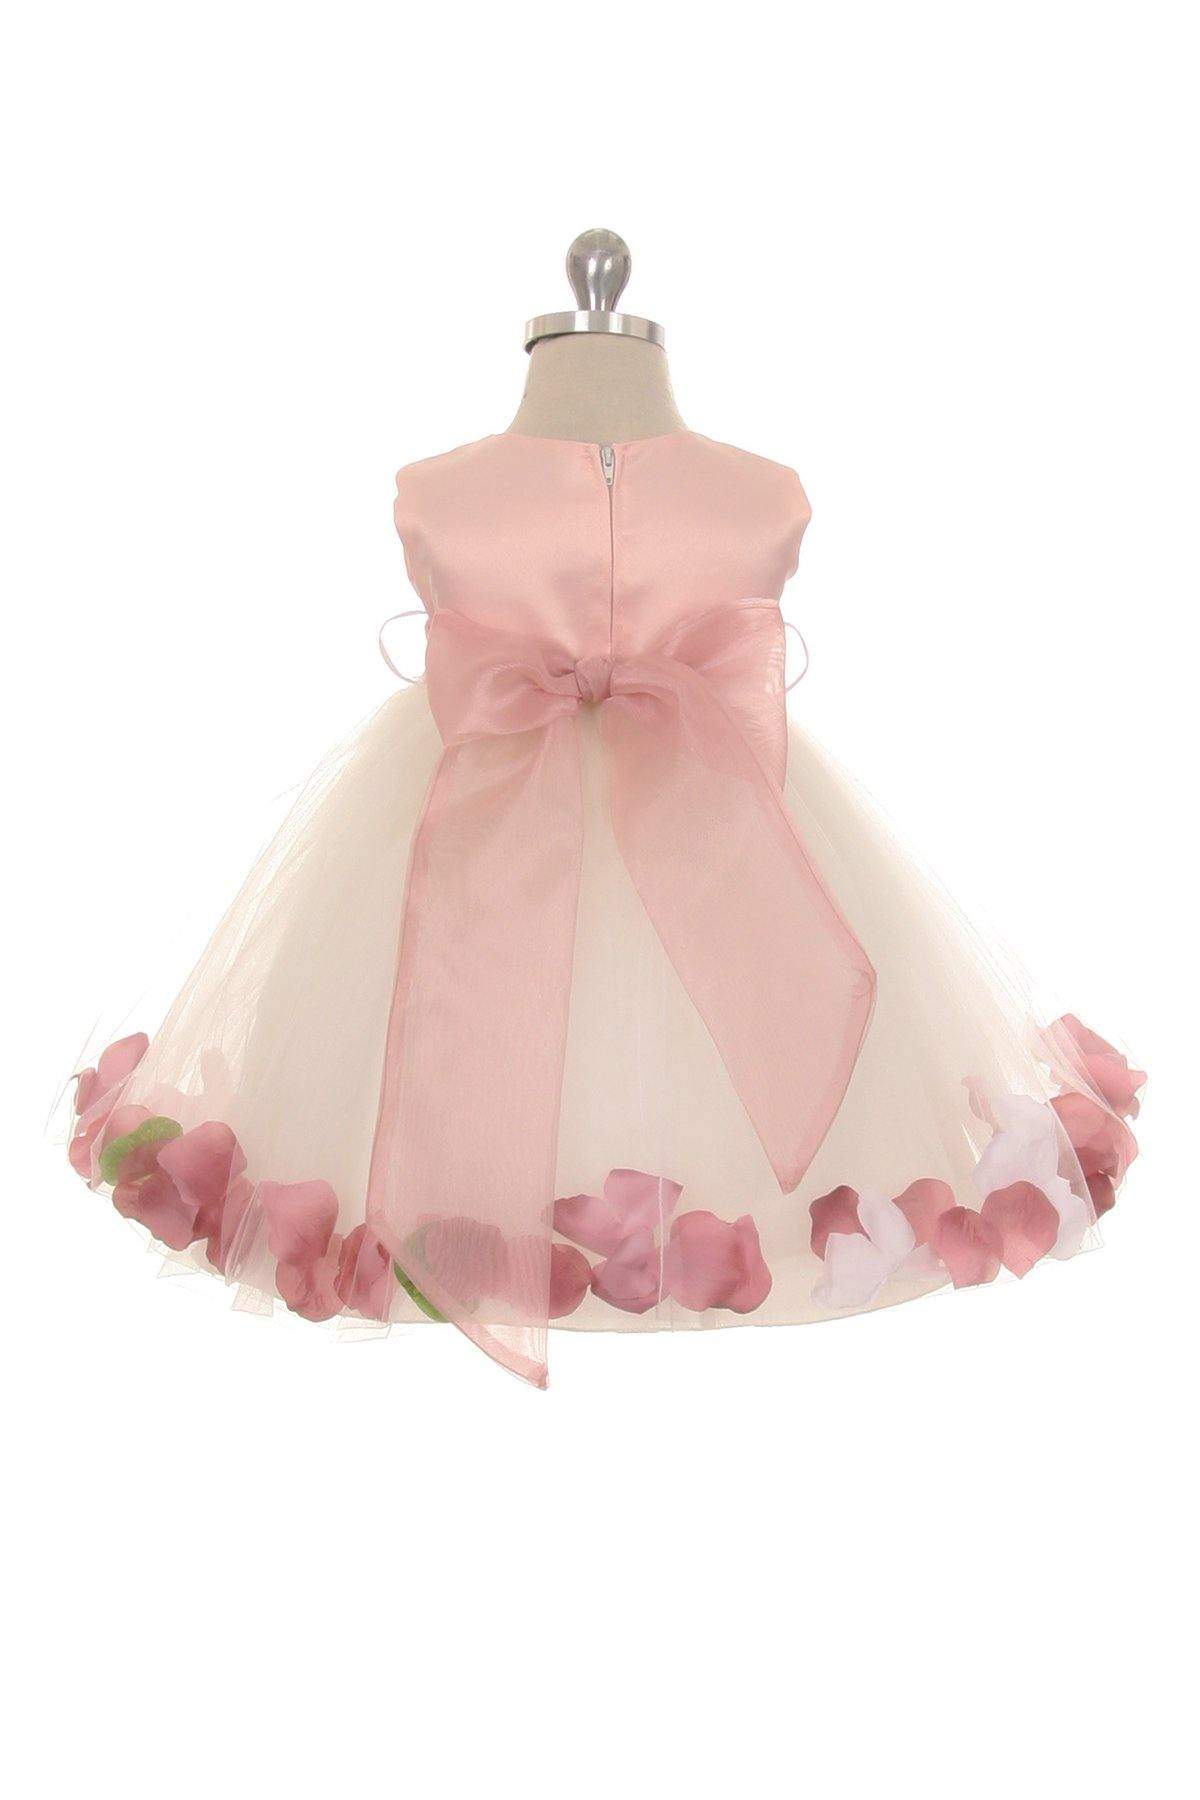 Satin Flower Petal Dress for Baby (1 Color)-Kid's Dream-baby-dress,baby_girl,color_Dusty Rose,color_Ivory,color_White,fabric_Satin,fabric_Tulle,meta-related-collection-shop-the-outfit-baby,Pink-collection,size_L-18 Months,size_M-12 Months,size_S-6 Months,size_XL-24 Months